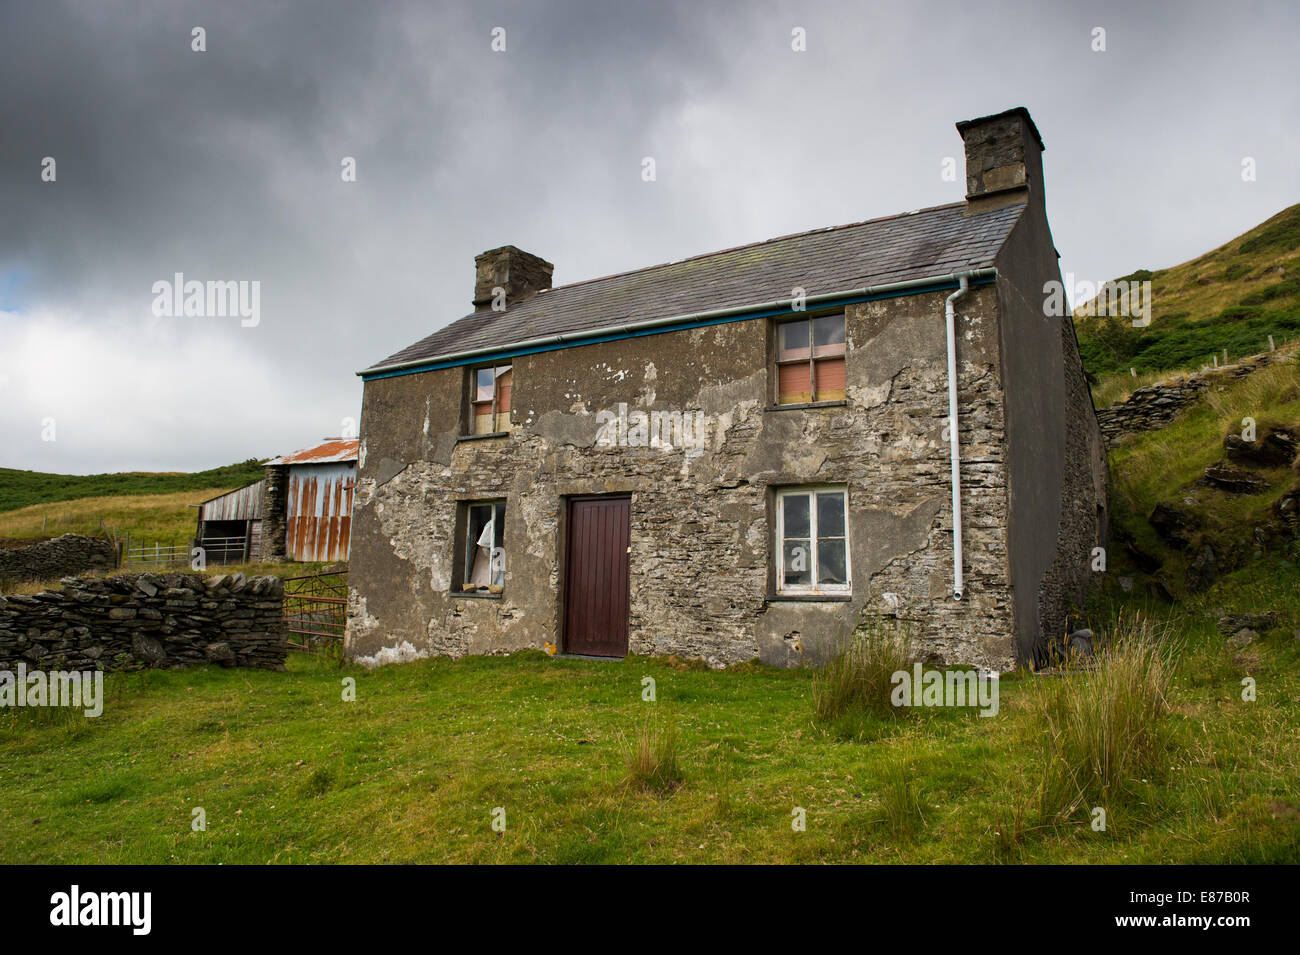 Bwlch Glas, abandoned and semi-derelict sheep farm, rural upland Ceredigion Wales UK Stock Photo